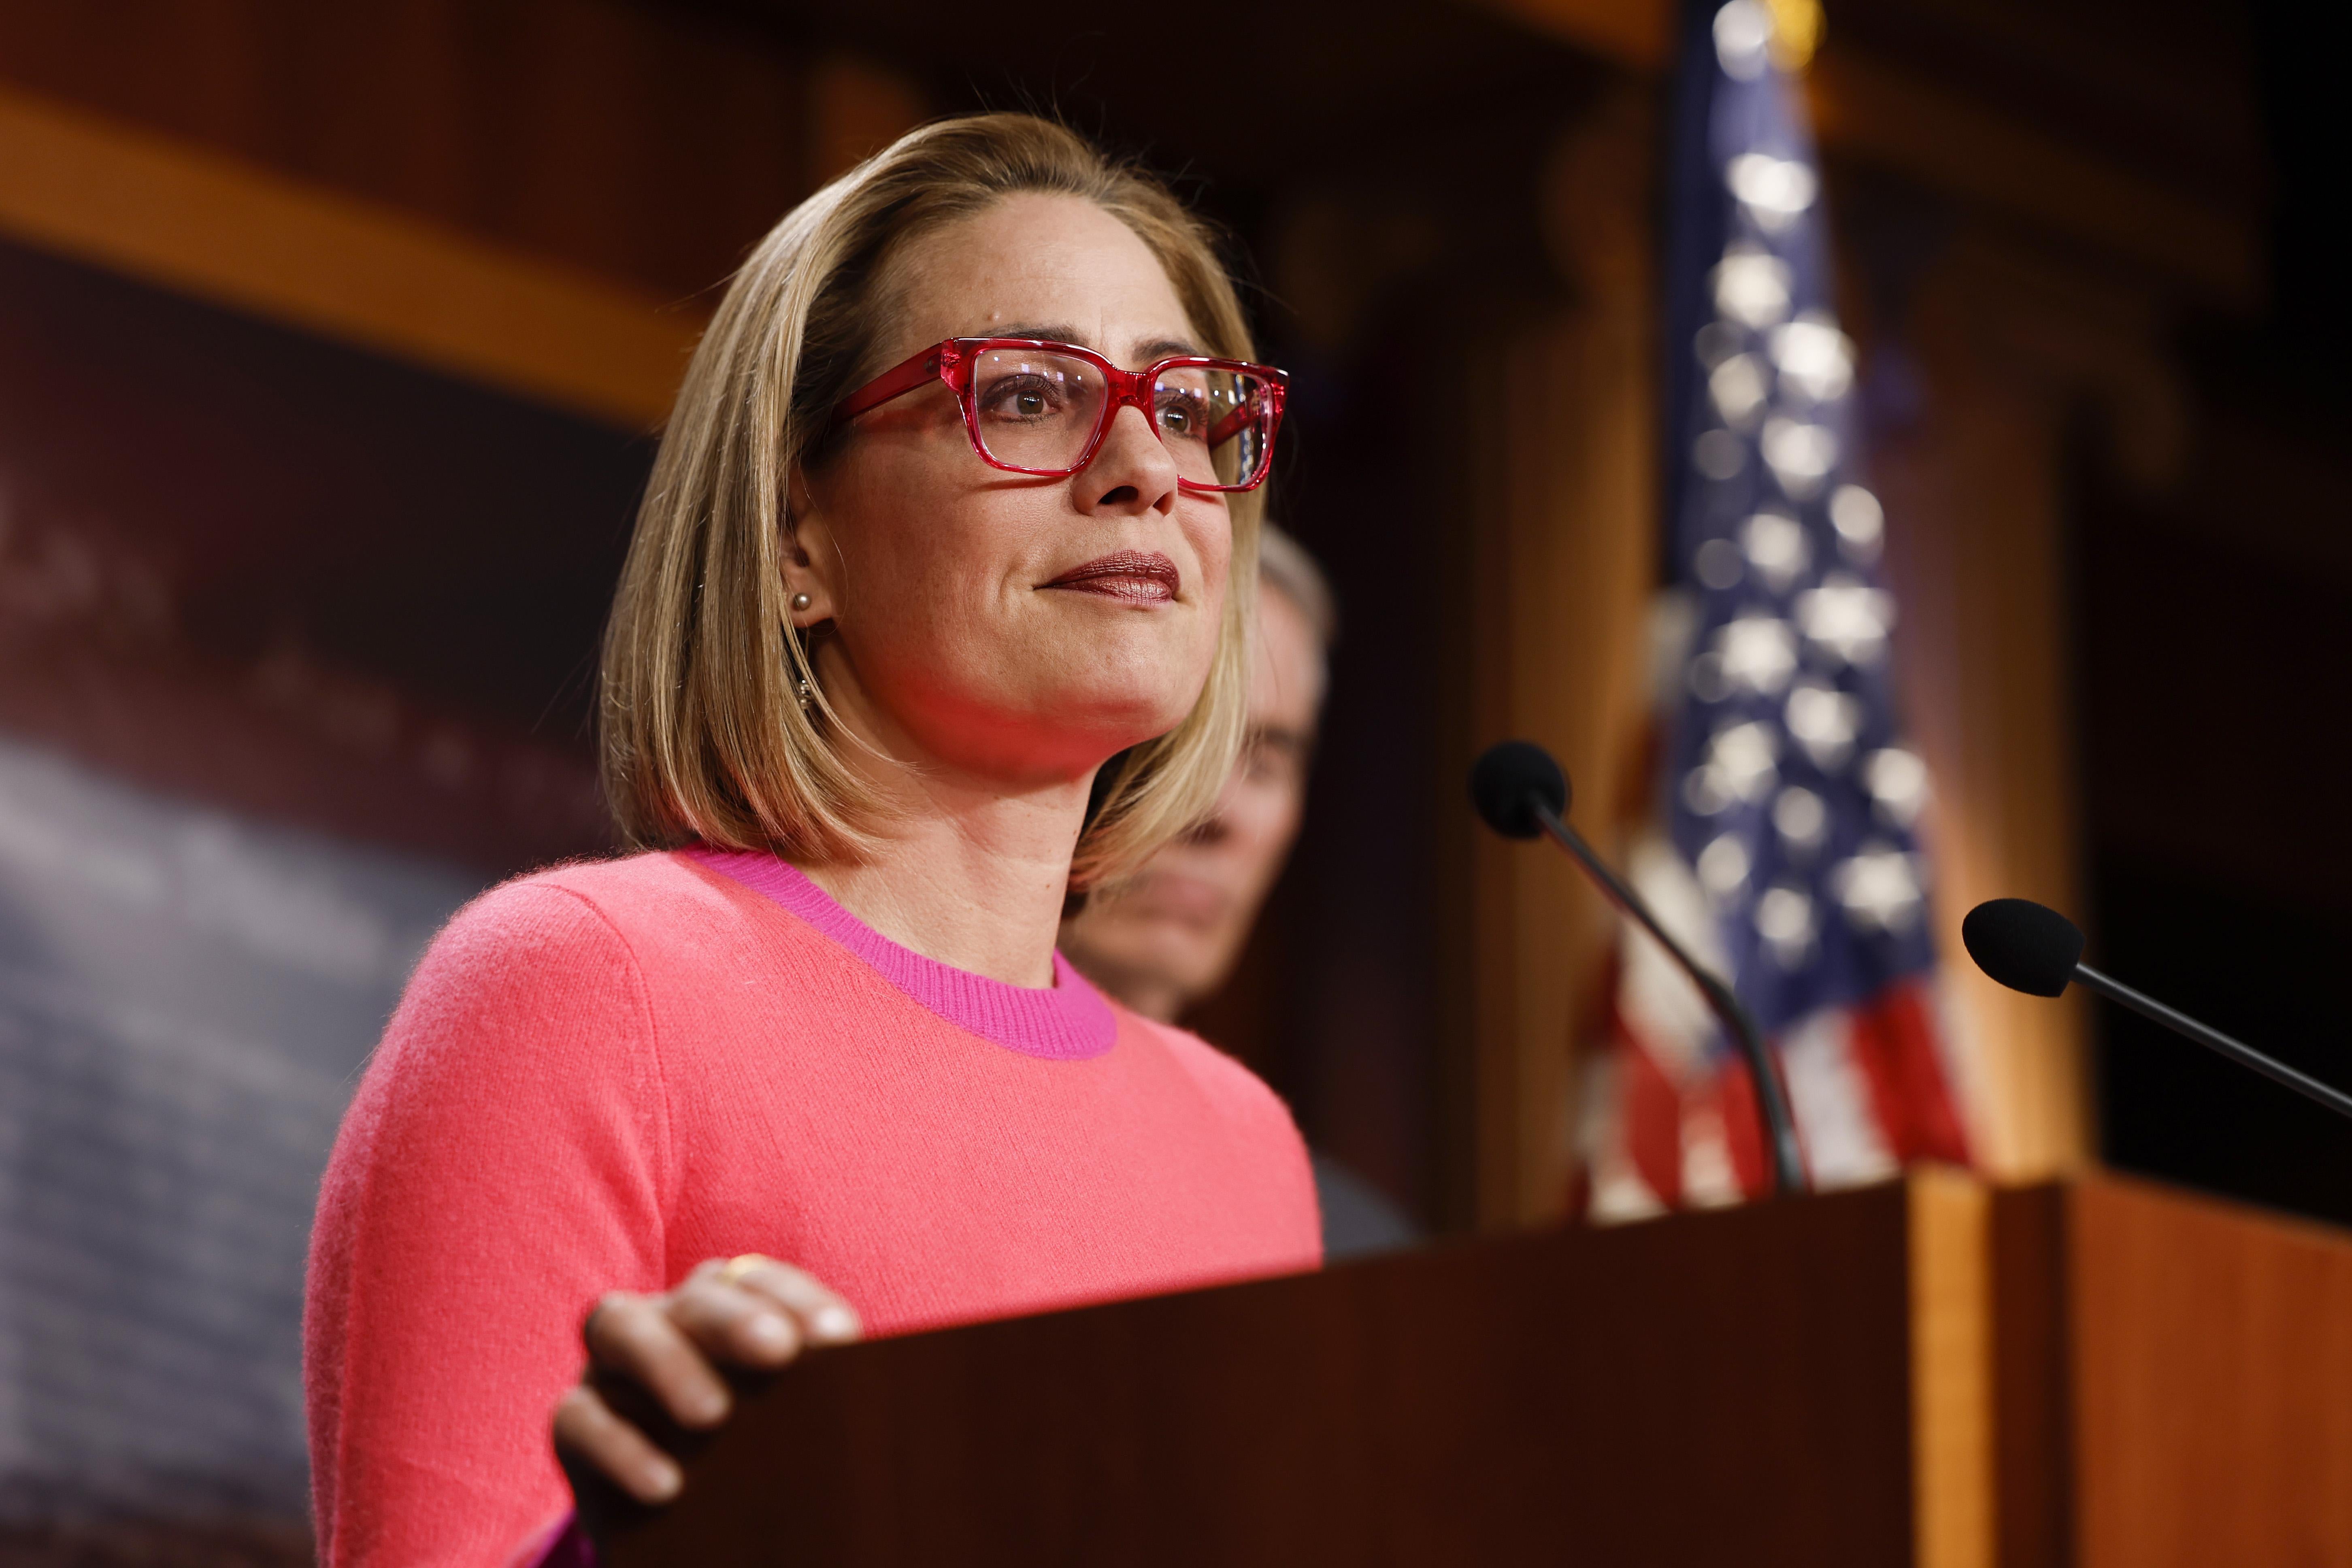 Sinema, wearing a pink sweater and red glasses, stands at a podium.